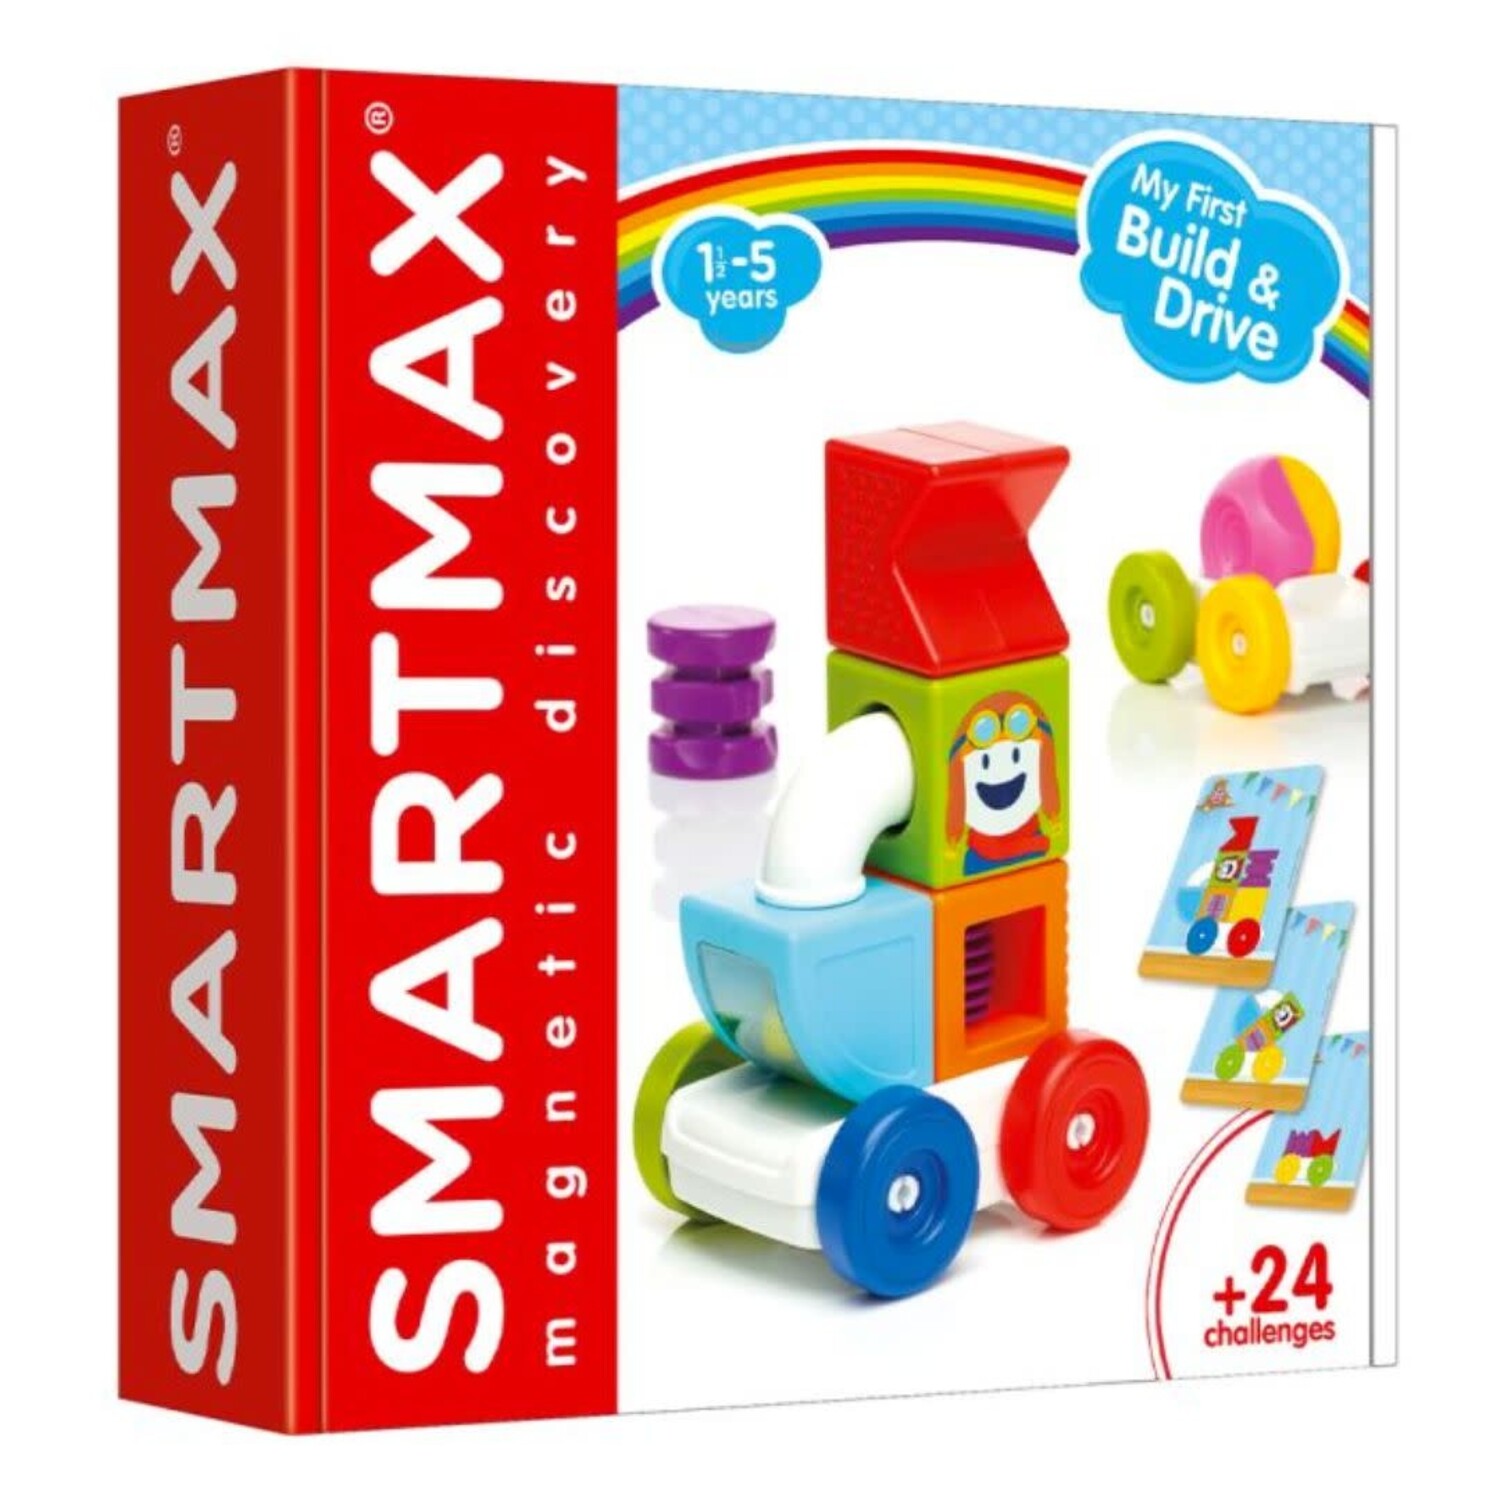 SmartMax My First Build & Drive - Mudpuddles Toys and Books